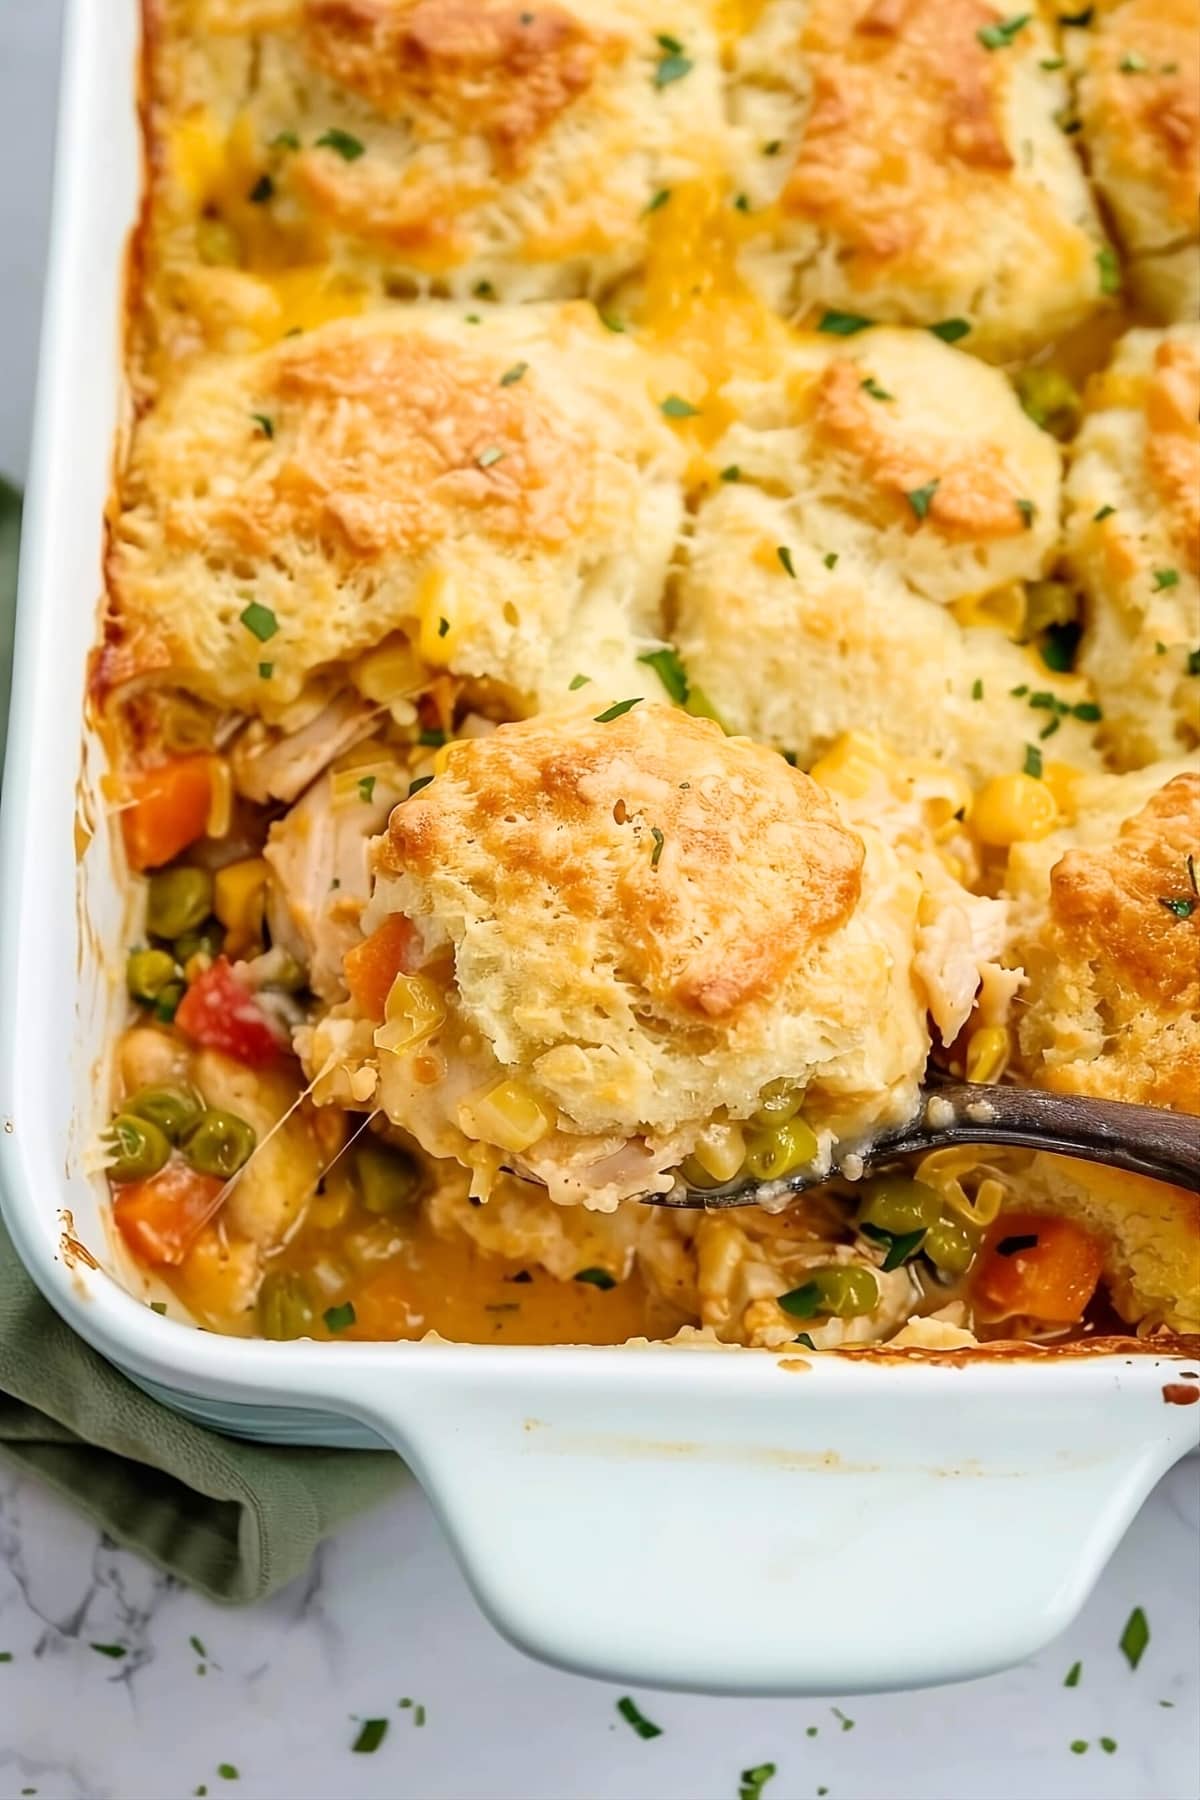 Chicken and biscuit casserole in a white baking dish.